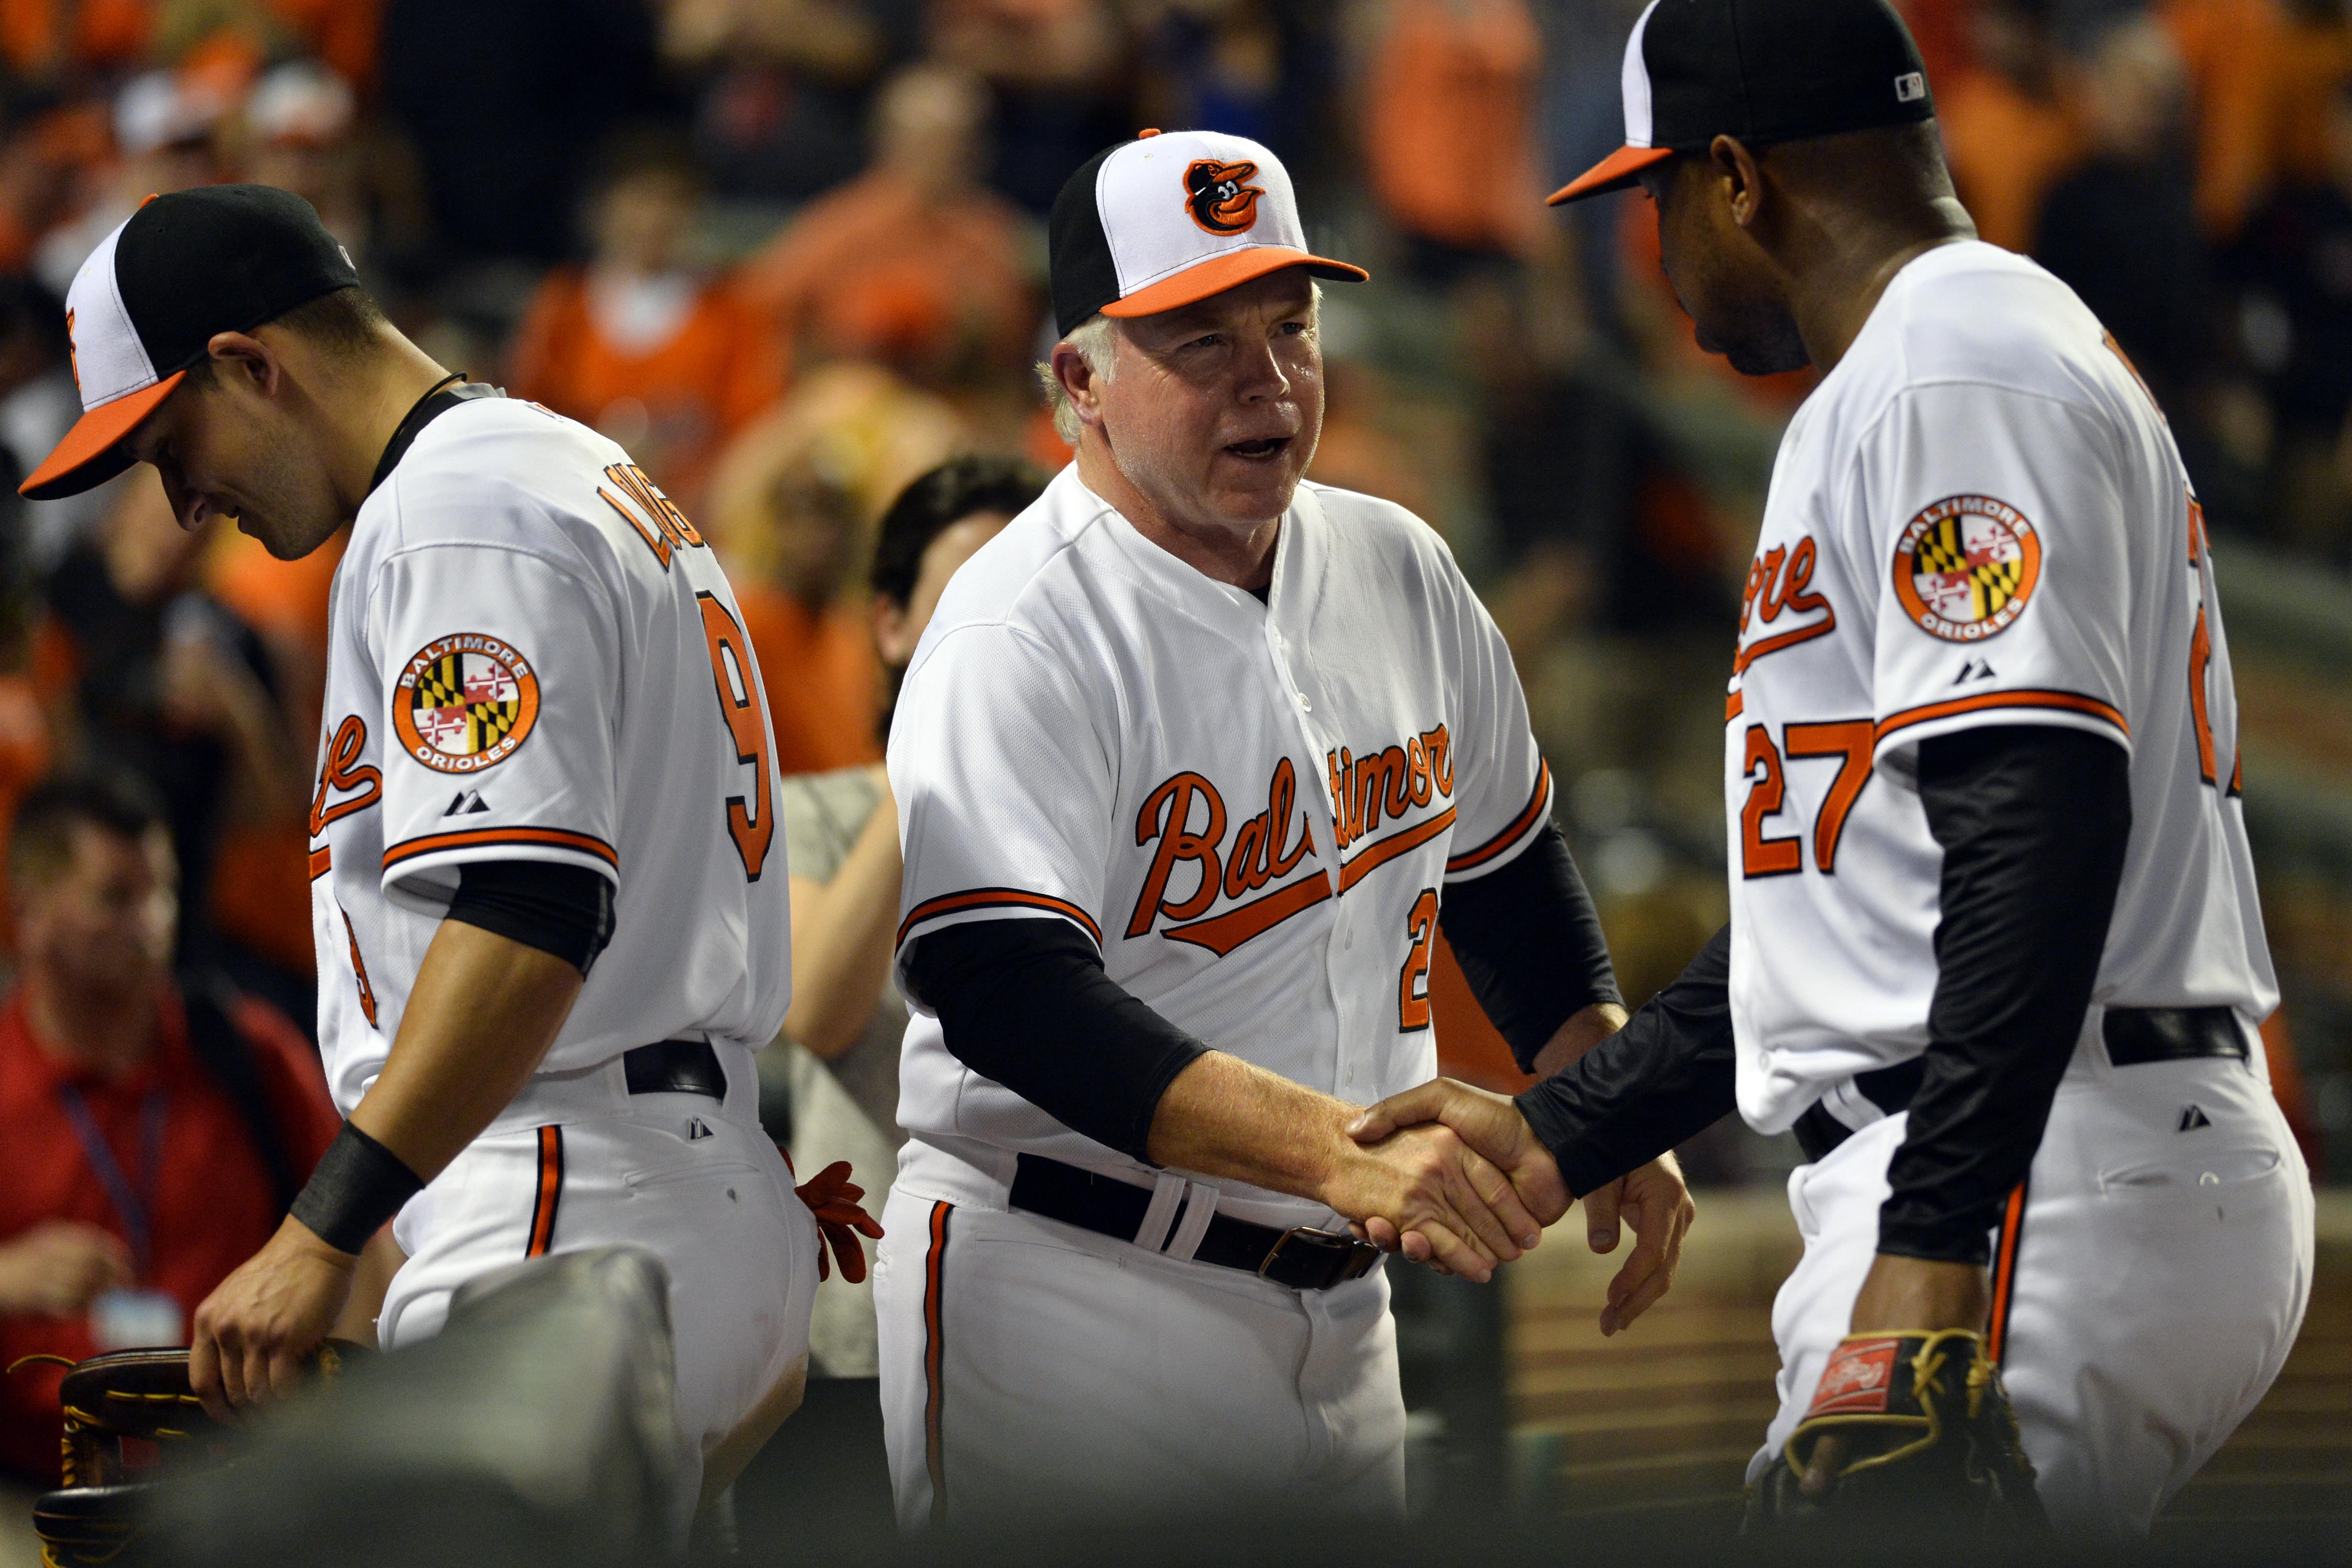 Orioles wear 'Baltimore' across uniforms to honor hometown in